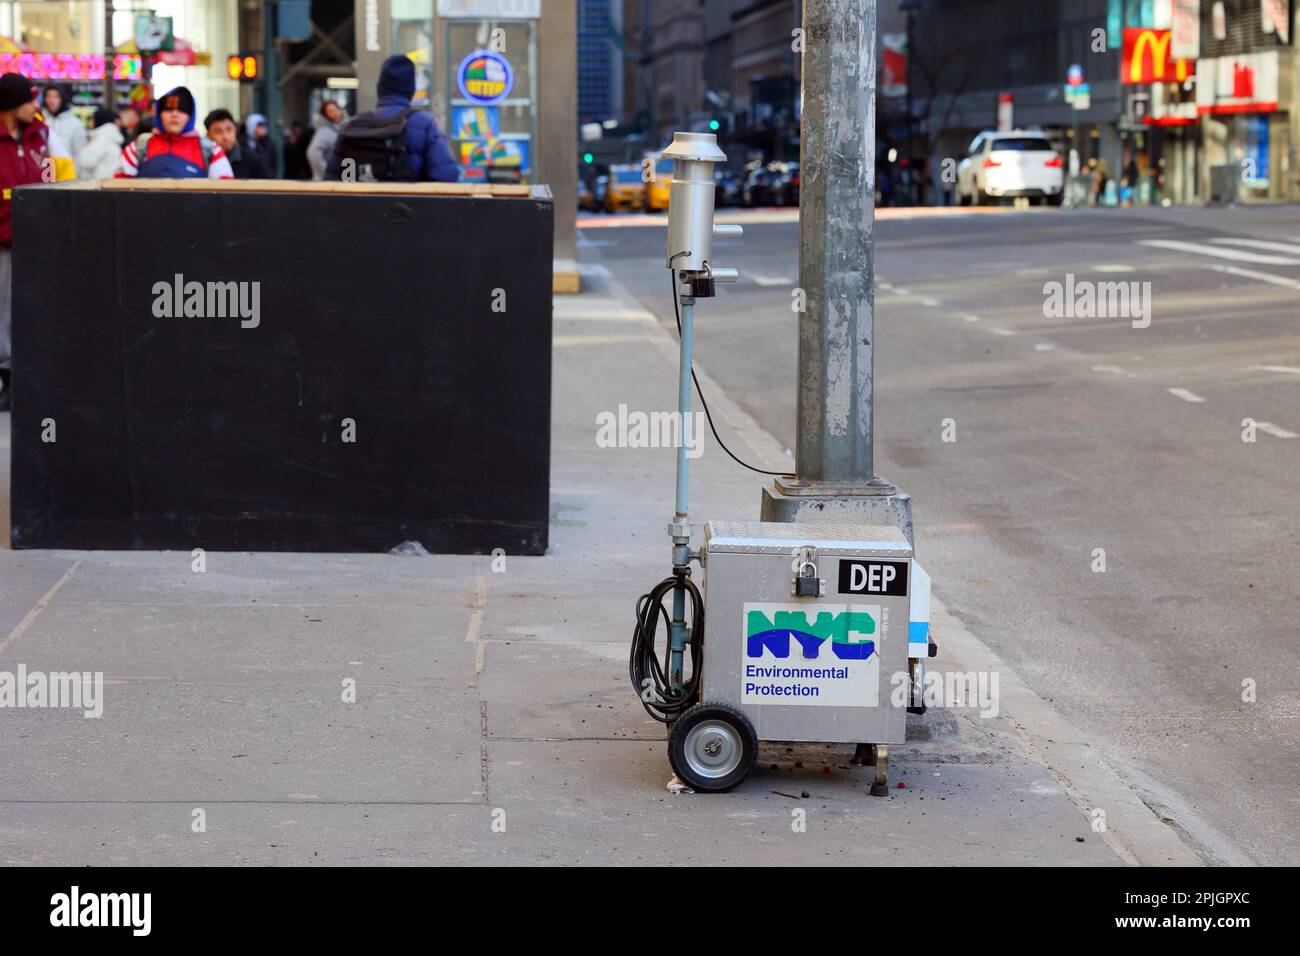 A NYC DEP air quality sampling station, on W 42nd St, in Midtown Manhattan. Stock Photo